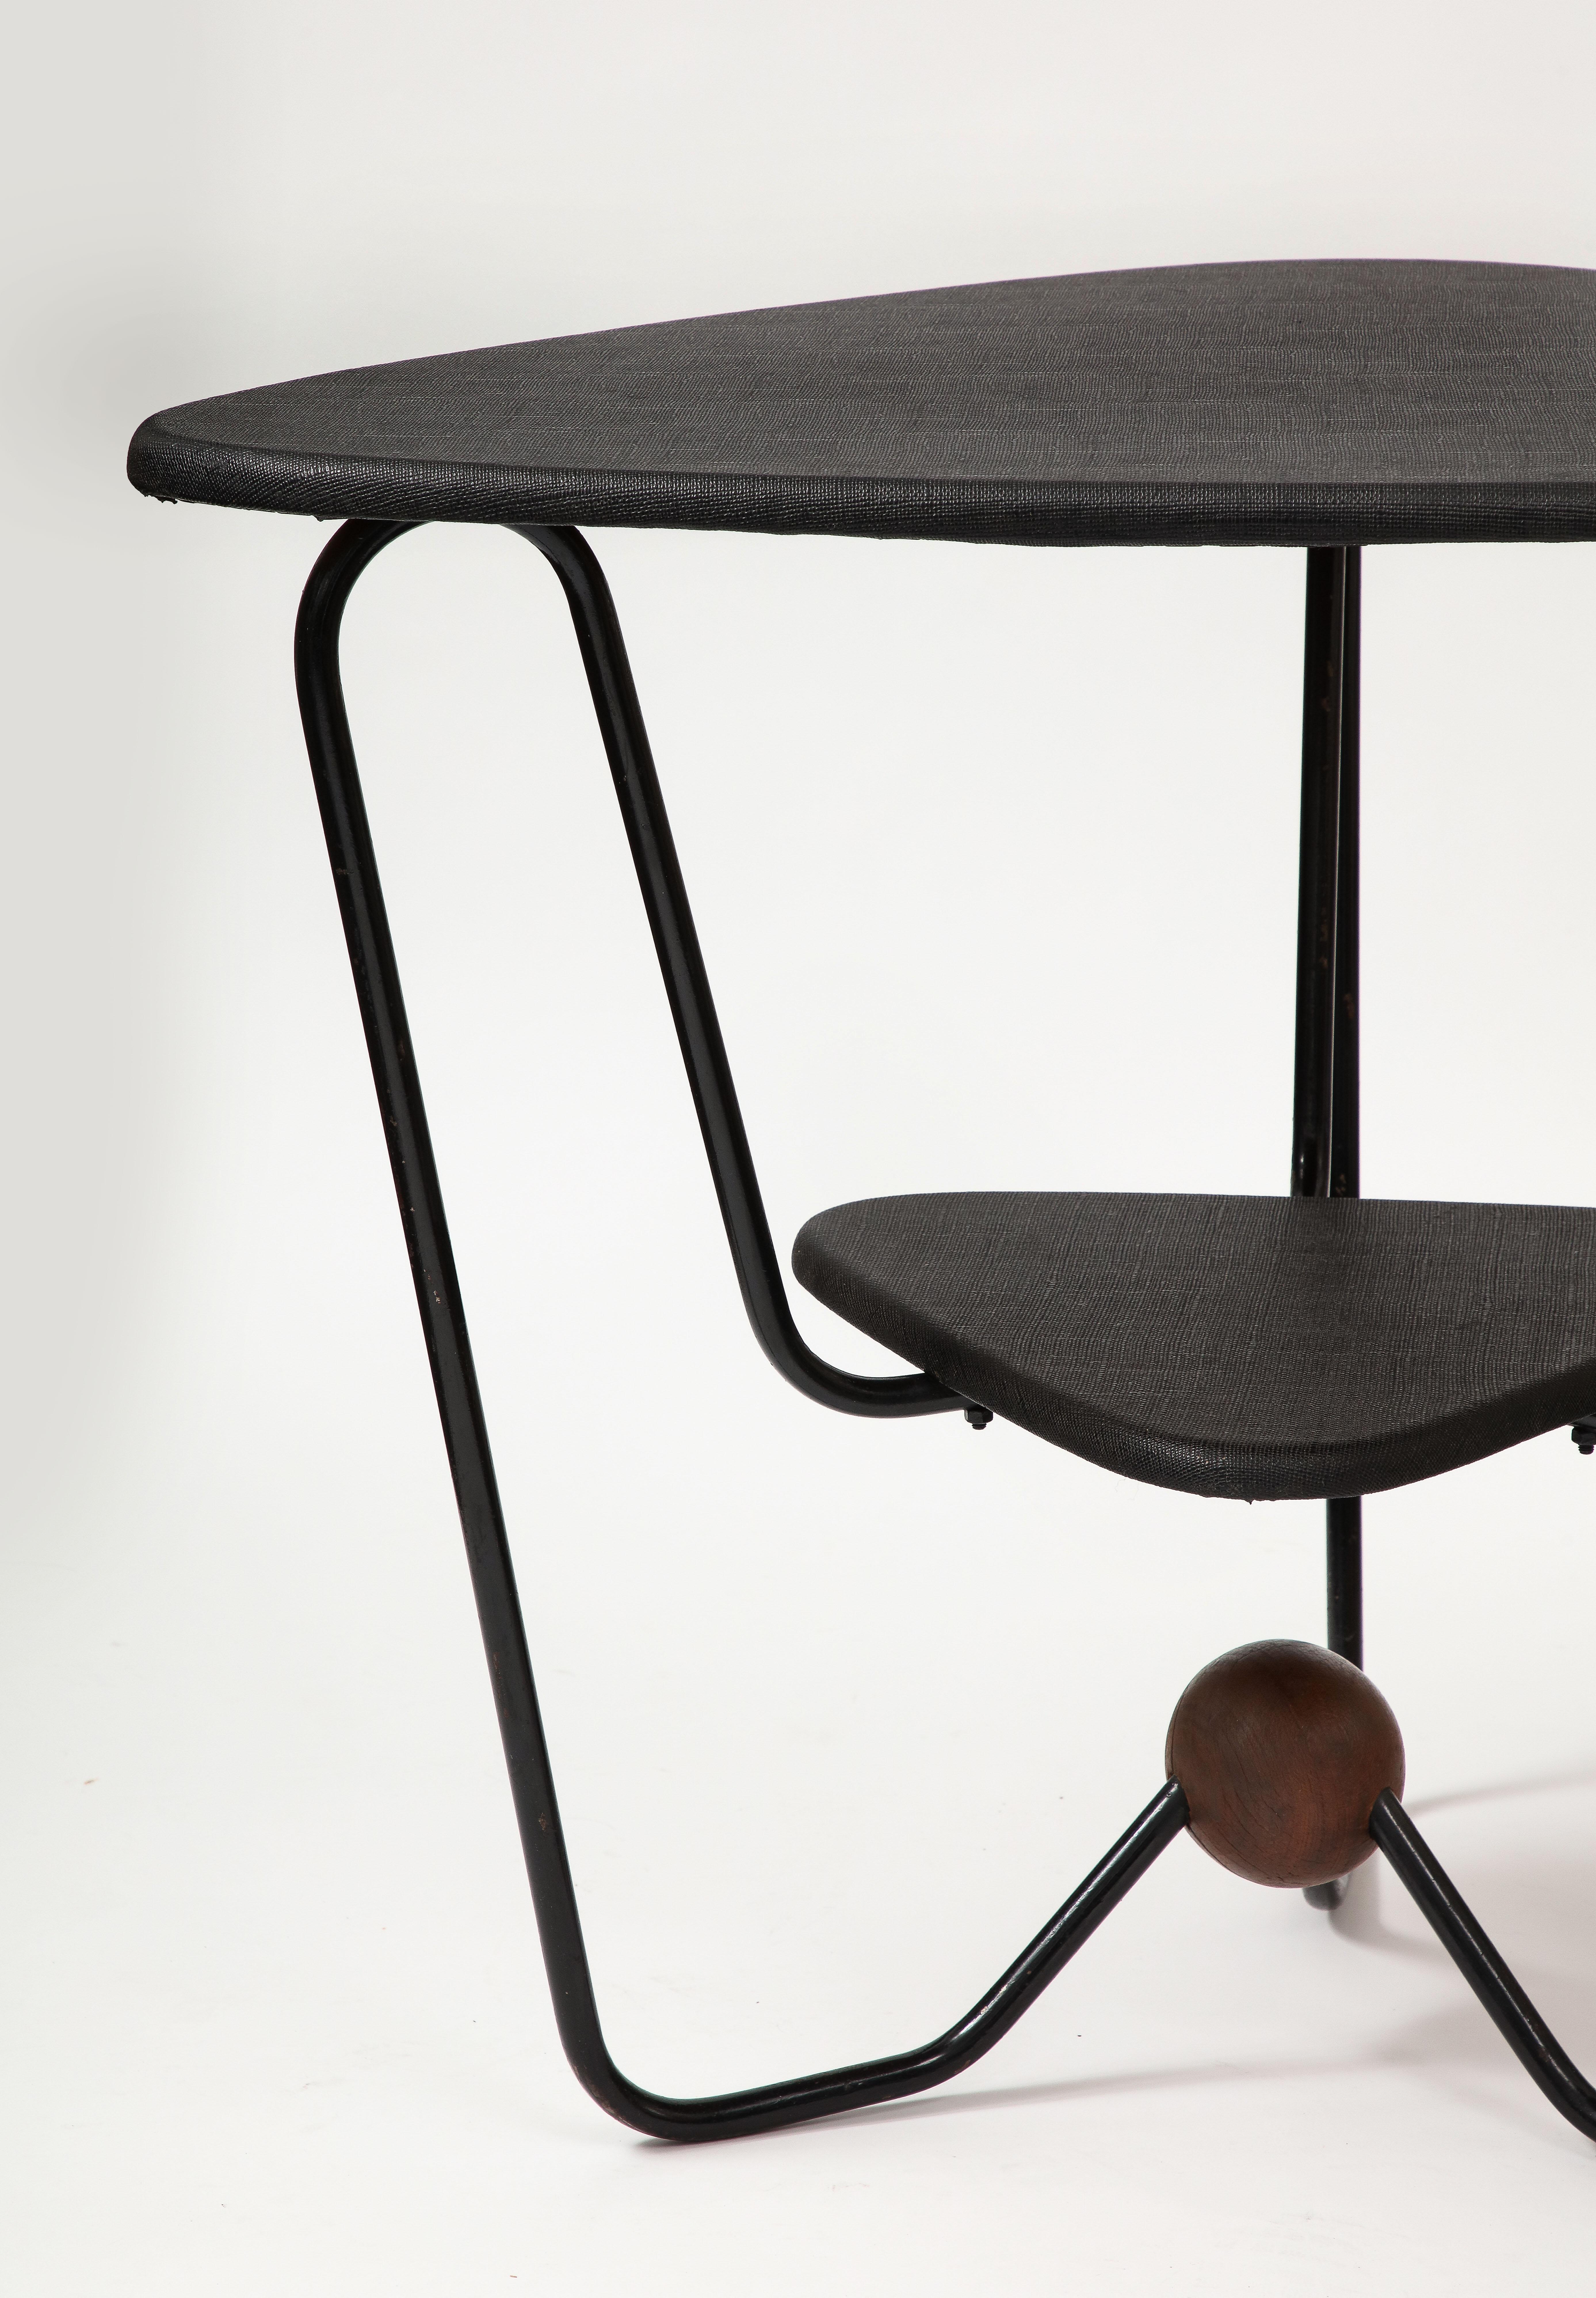 Triangular Steel, Walnut, and Textile Side Table, Italy, c. 1960 For Sale 2